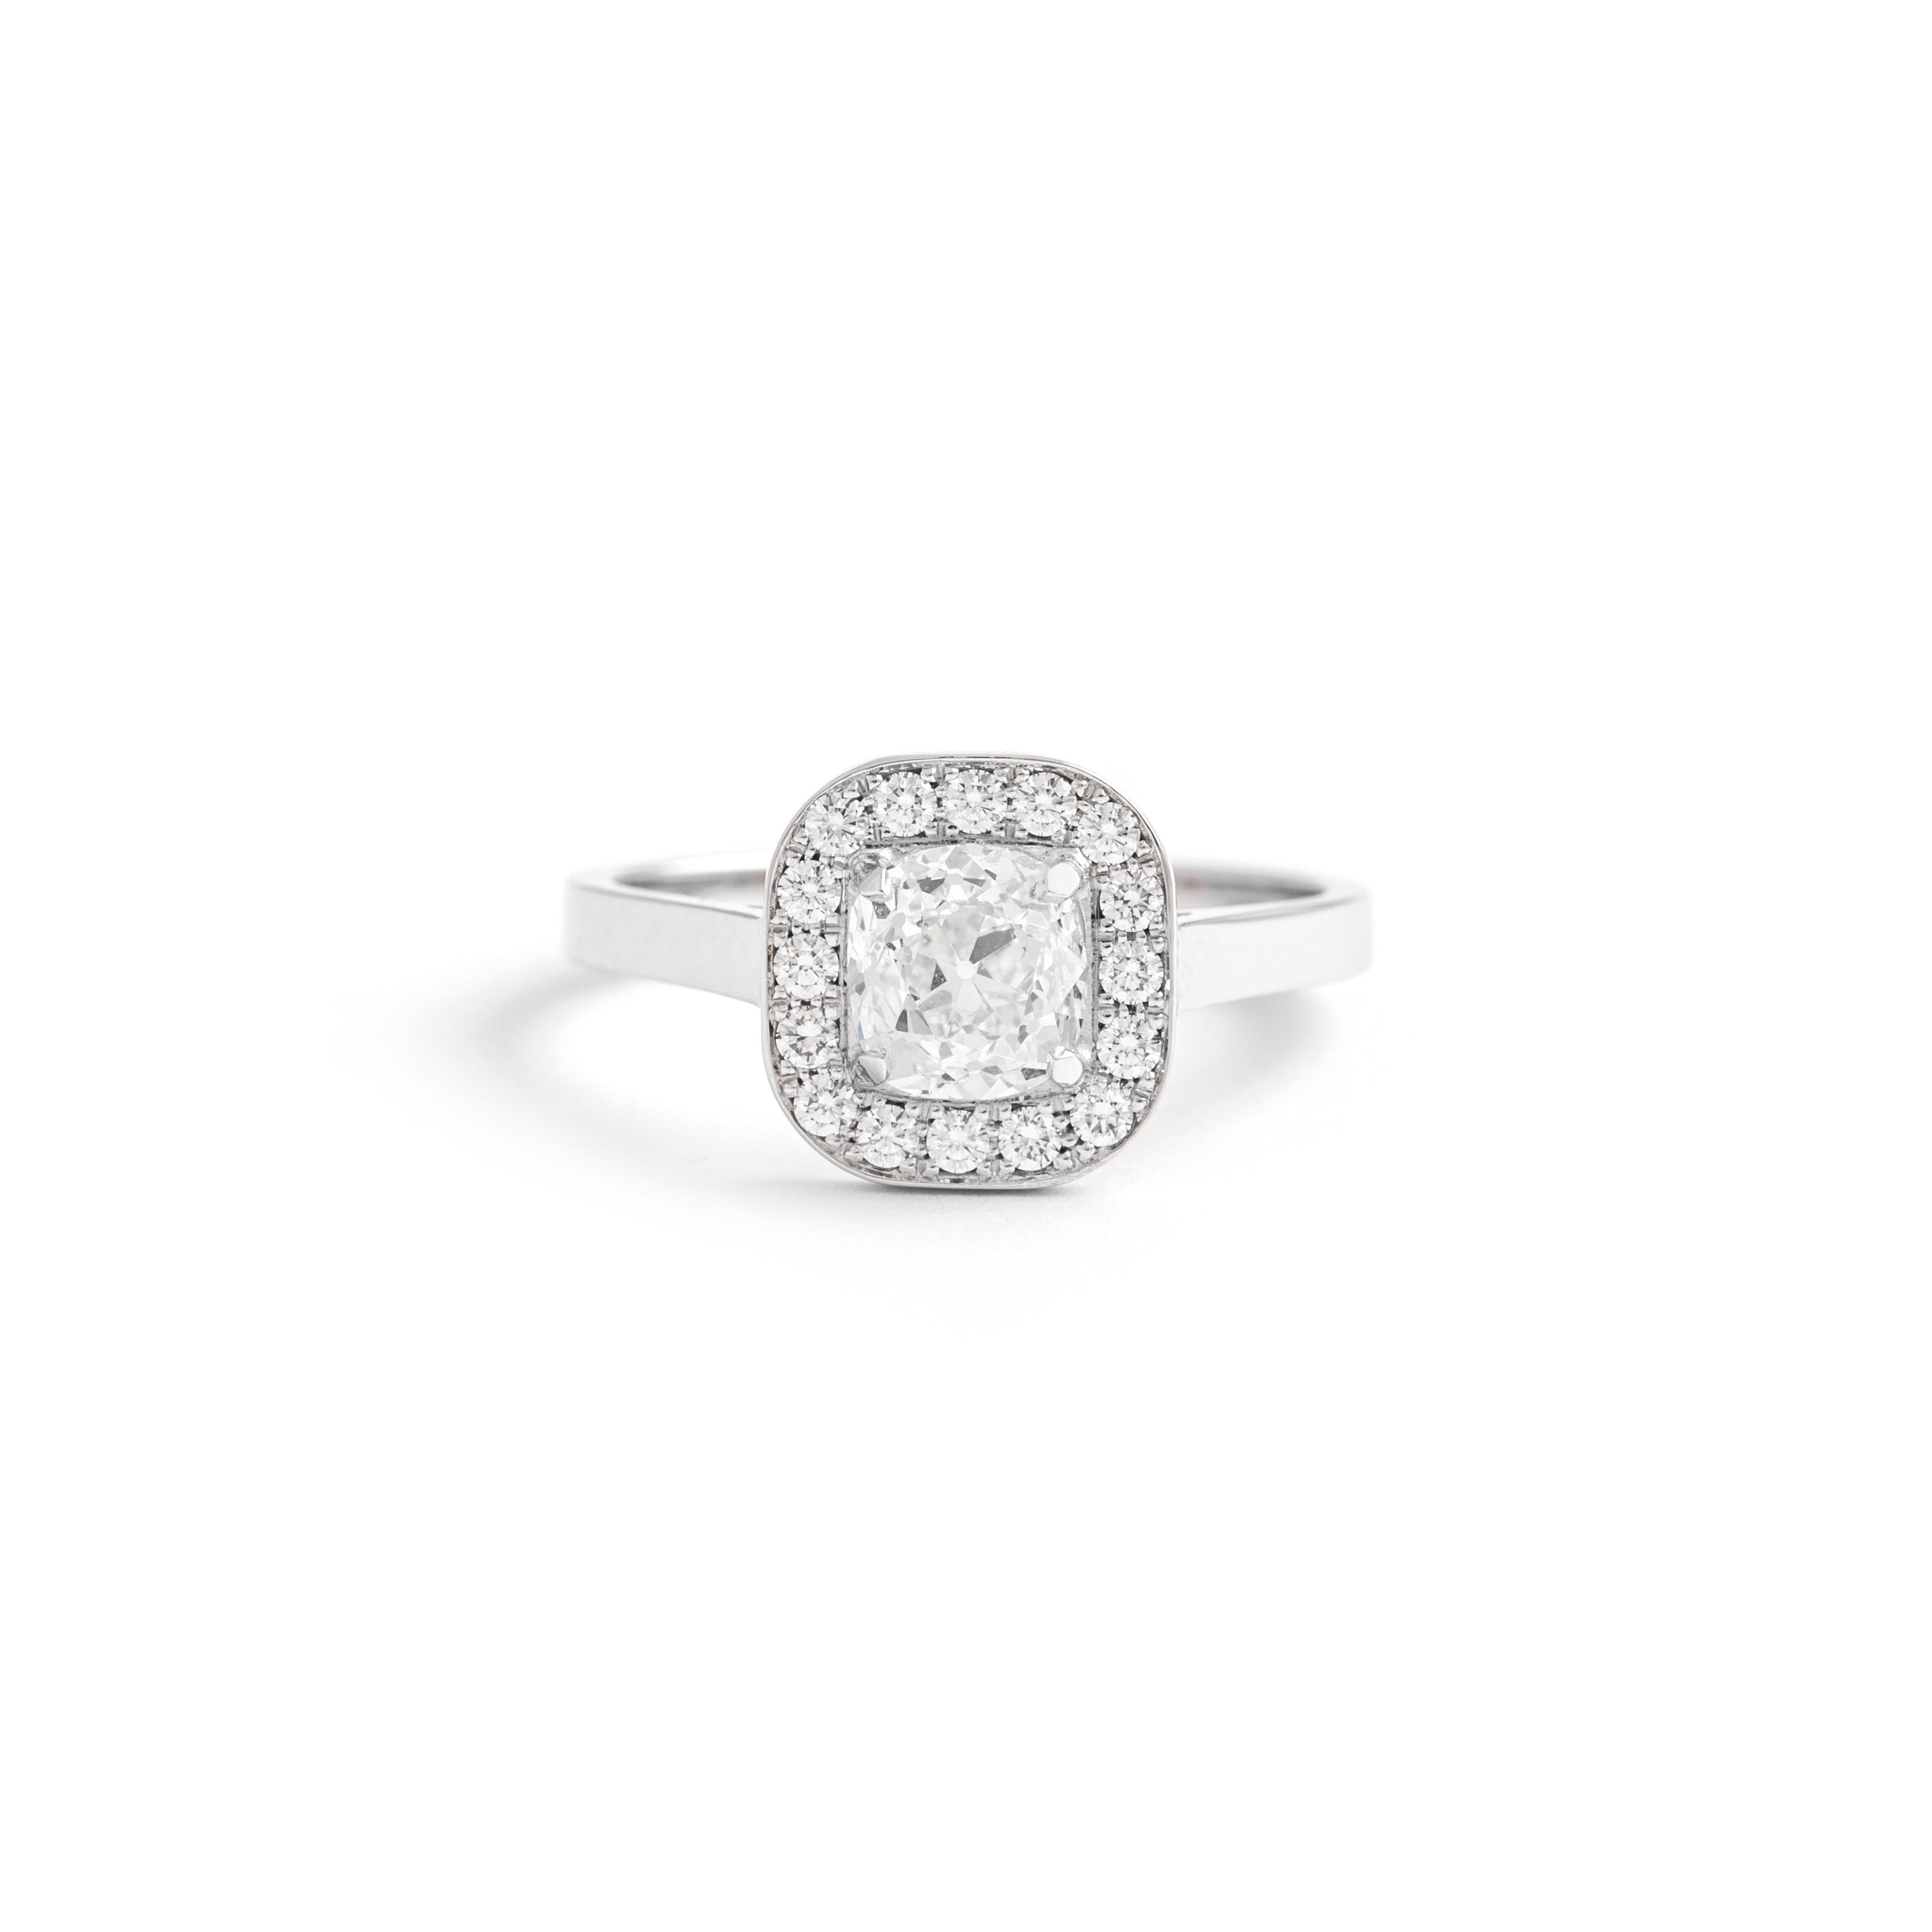 Solitaire Diamond ring 1.04 carat, GIA, H/Vvs2, surrounded by 15 diamonds, each one diameter 1.50 mm.

Weight: 3.91 grams.
Size: 54